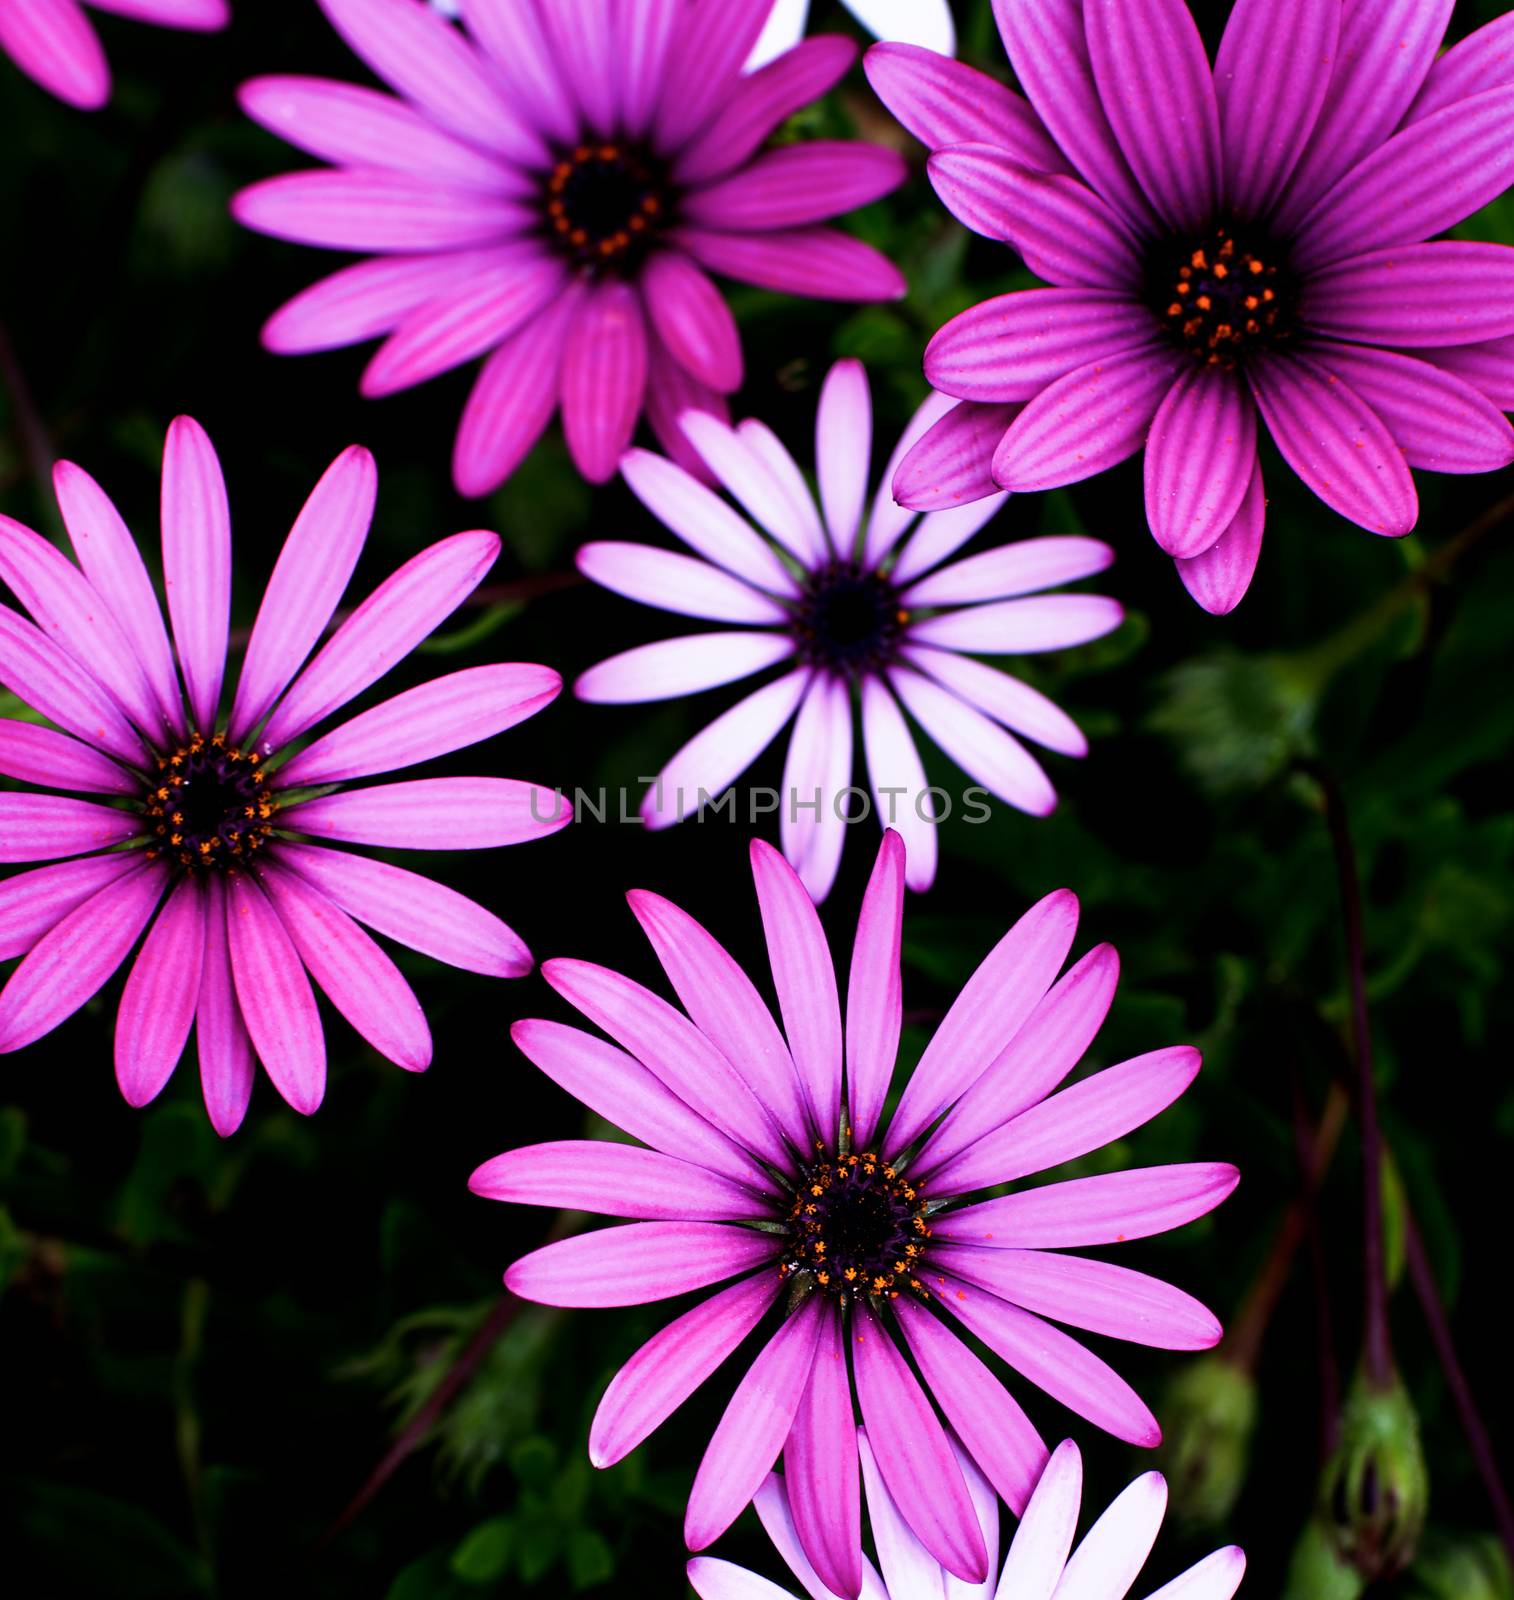 Beauty Light and Dark Pink Garden Daisy Flowers on Blurred Flower and Leafs background Outdoors